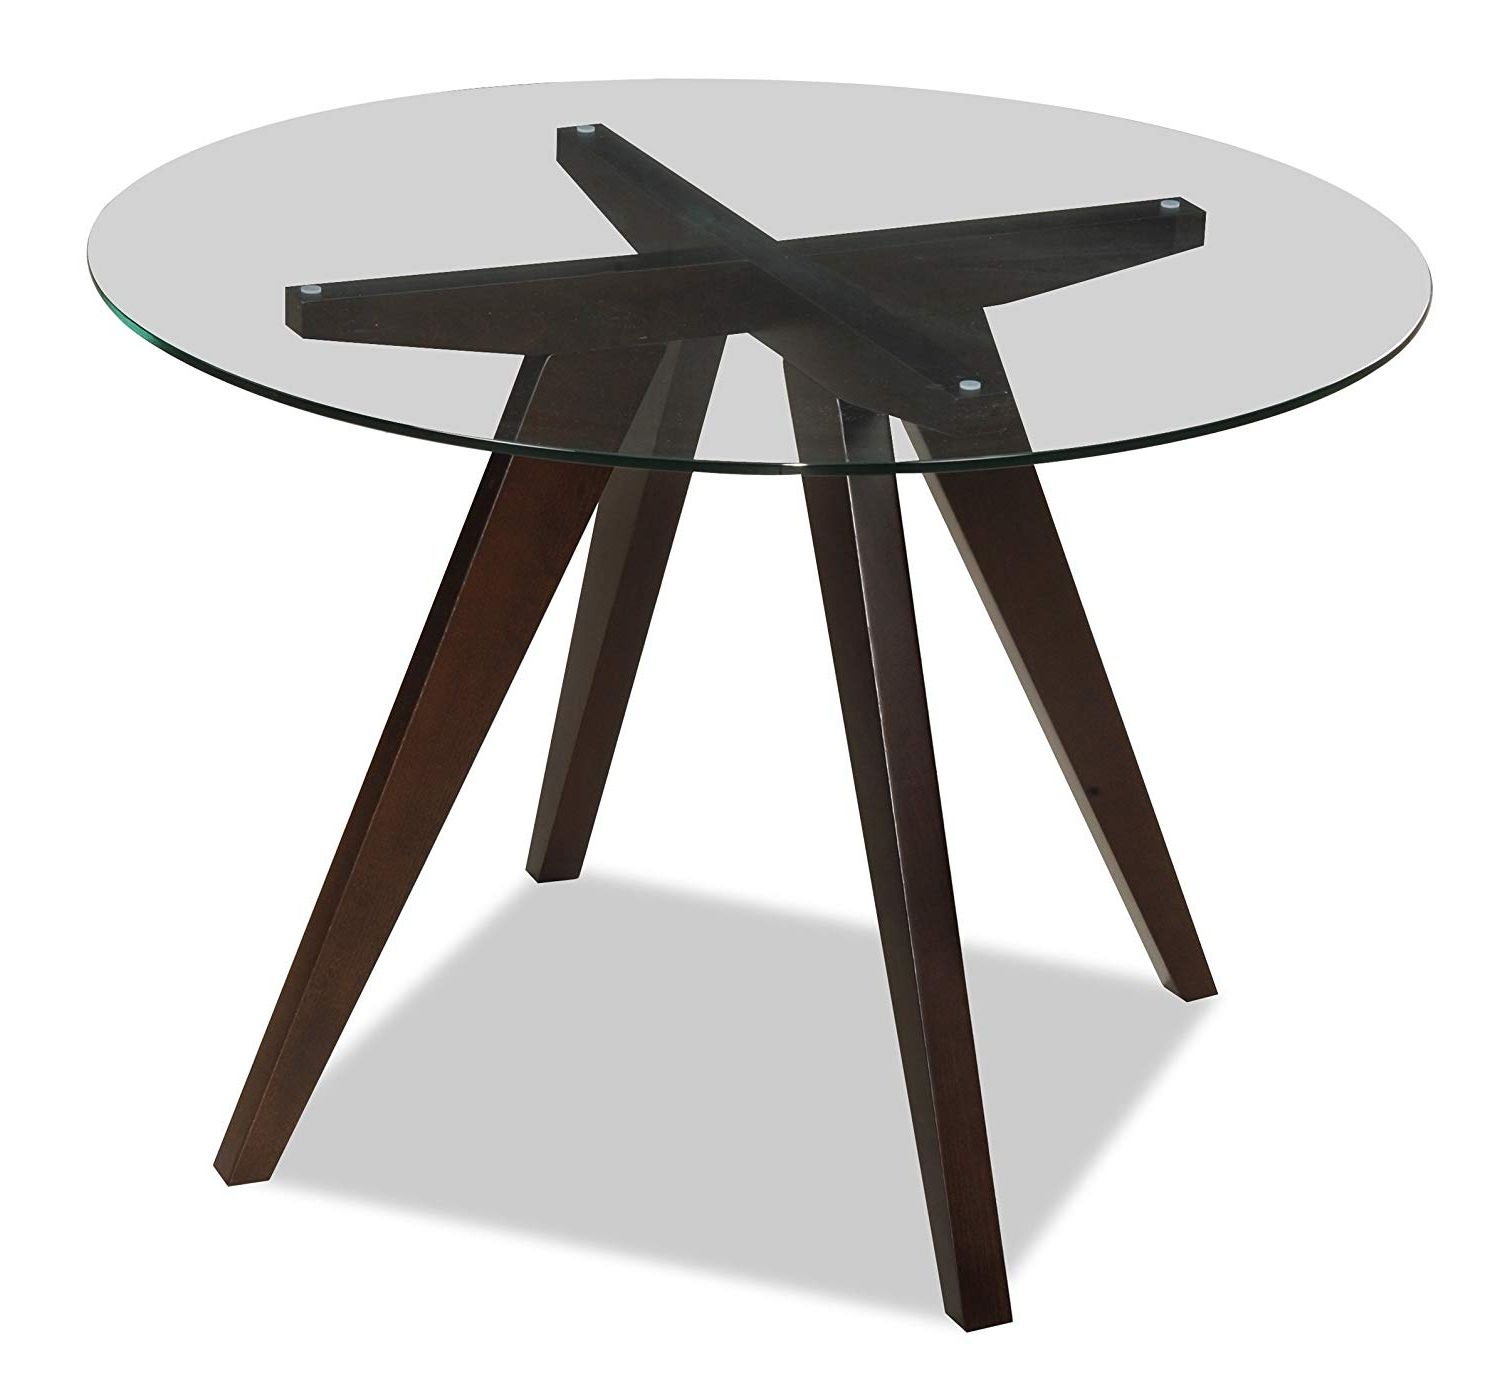 Round Glass Top Dining Tables Within Most Popular Uptown Club Caleope Collection Contemporary Round Glass Top Dining Room  Table, 41.3"l X 41.3" W X  (View 25 of 25)